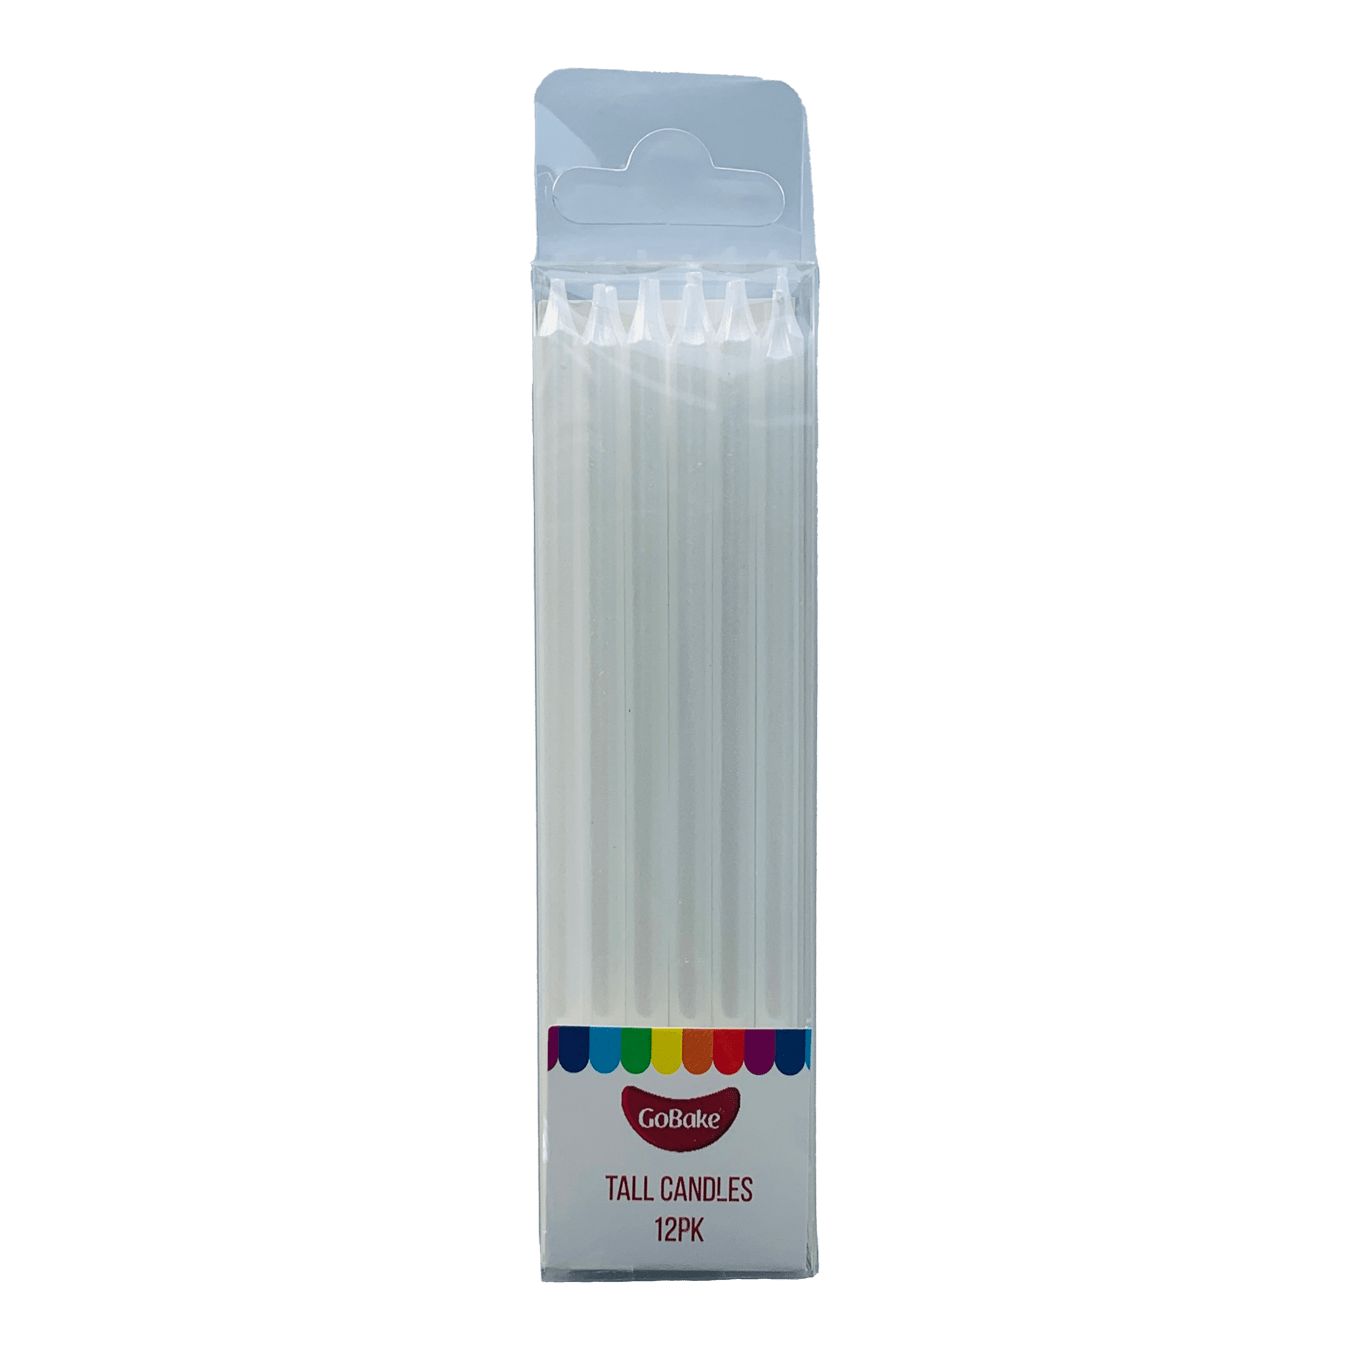 Six pearl white slim tall candles for your cake. 